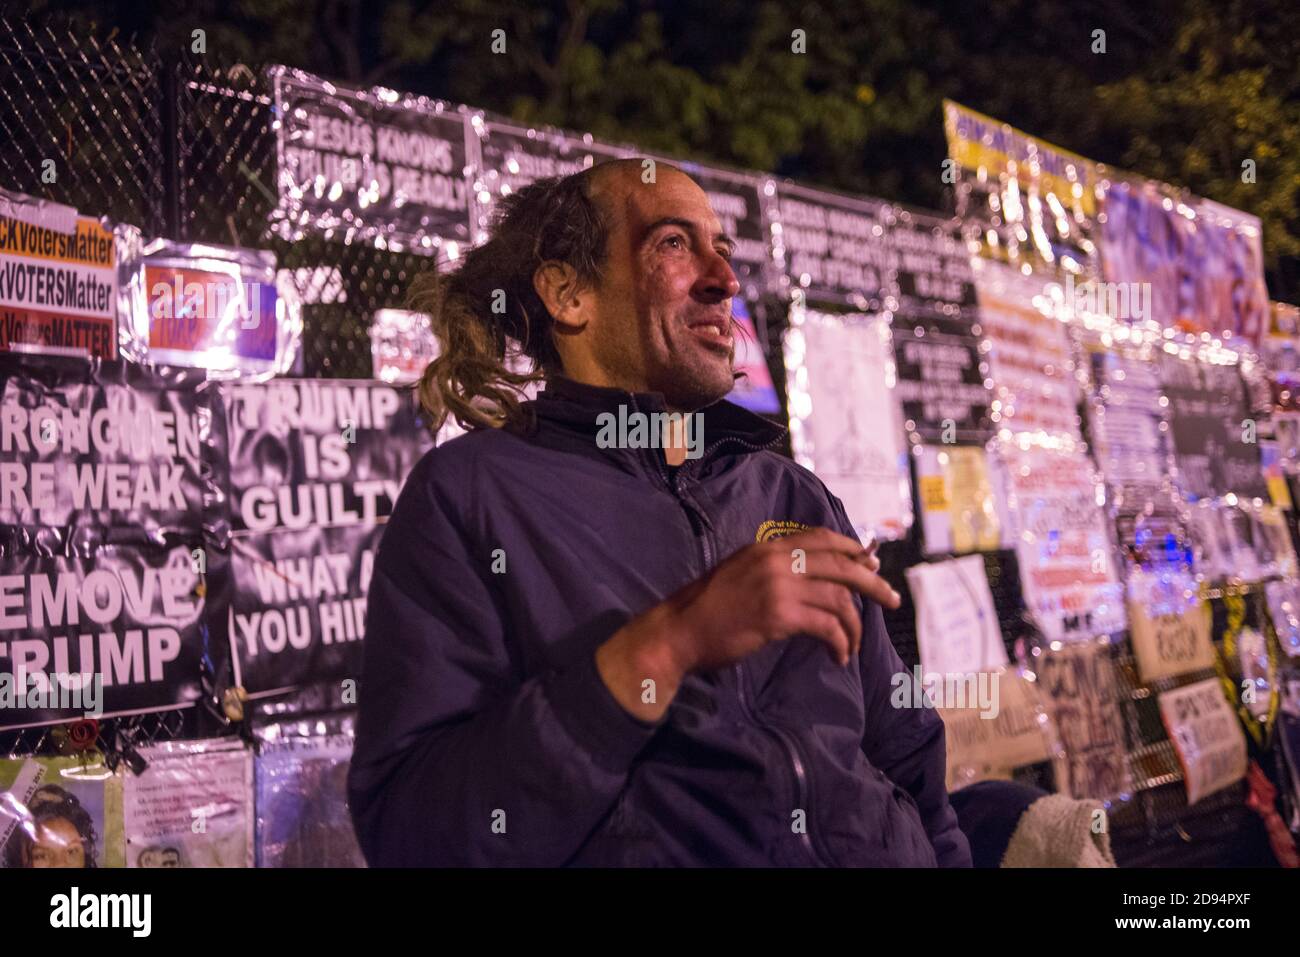 Washington, DC, USA, 2nd Nov 2020. Anti Trump supporter in front of the White House, with anti Trump signs behind him, in the Nation's Capitol. Credit: Yuriy Zahvoyskyy / Alamy Live News. Stock Photo